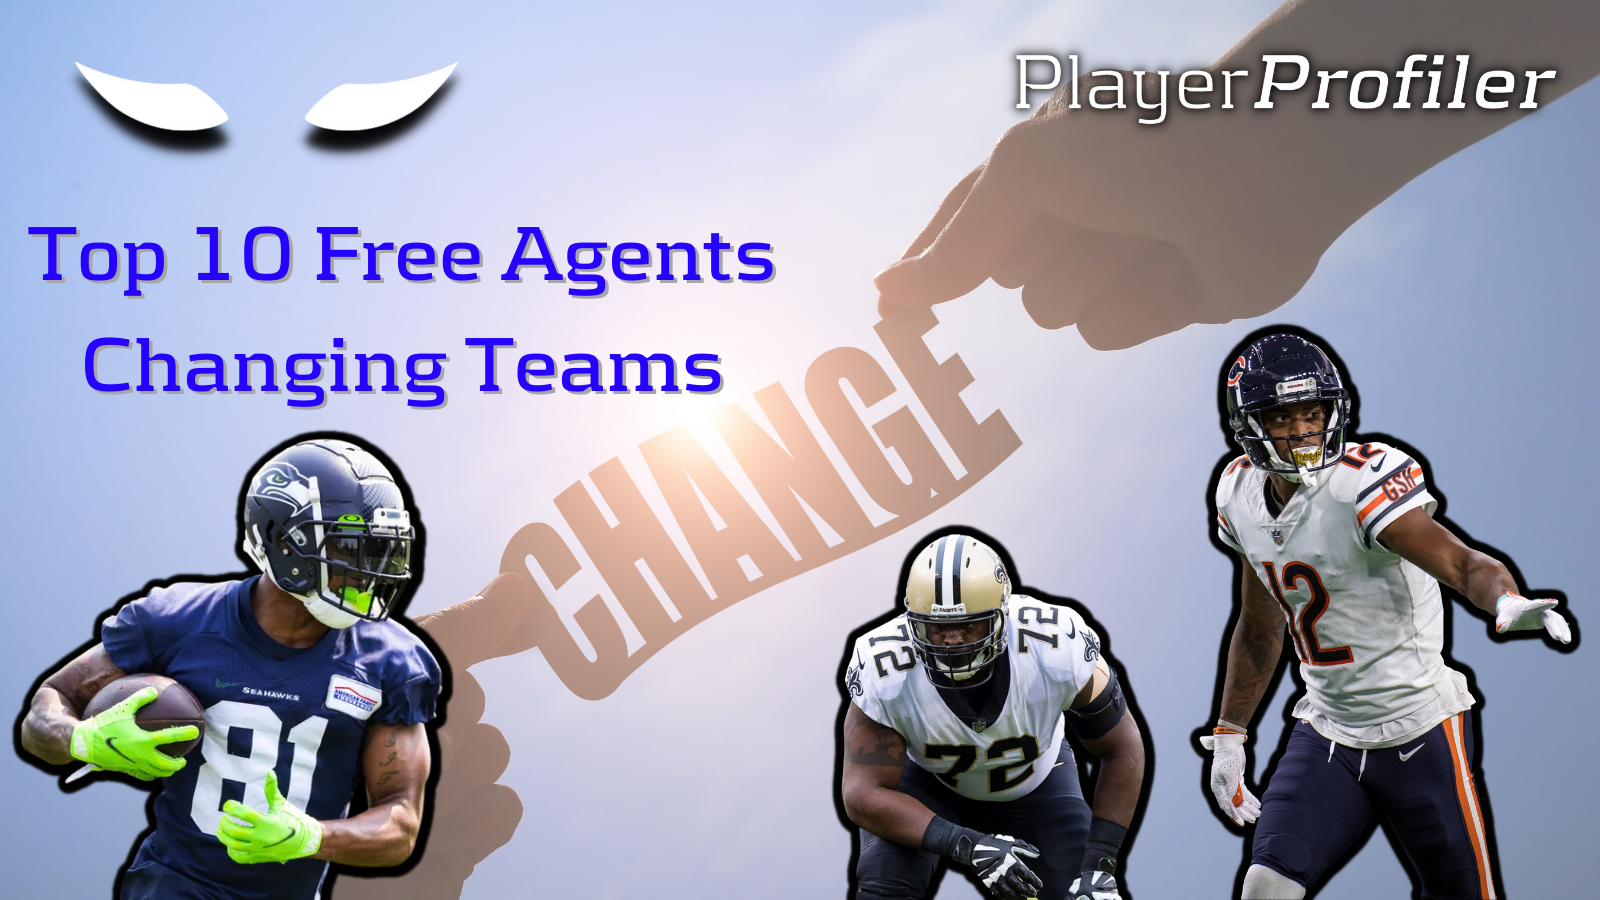 Top 10 Free Agents